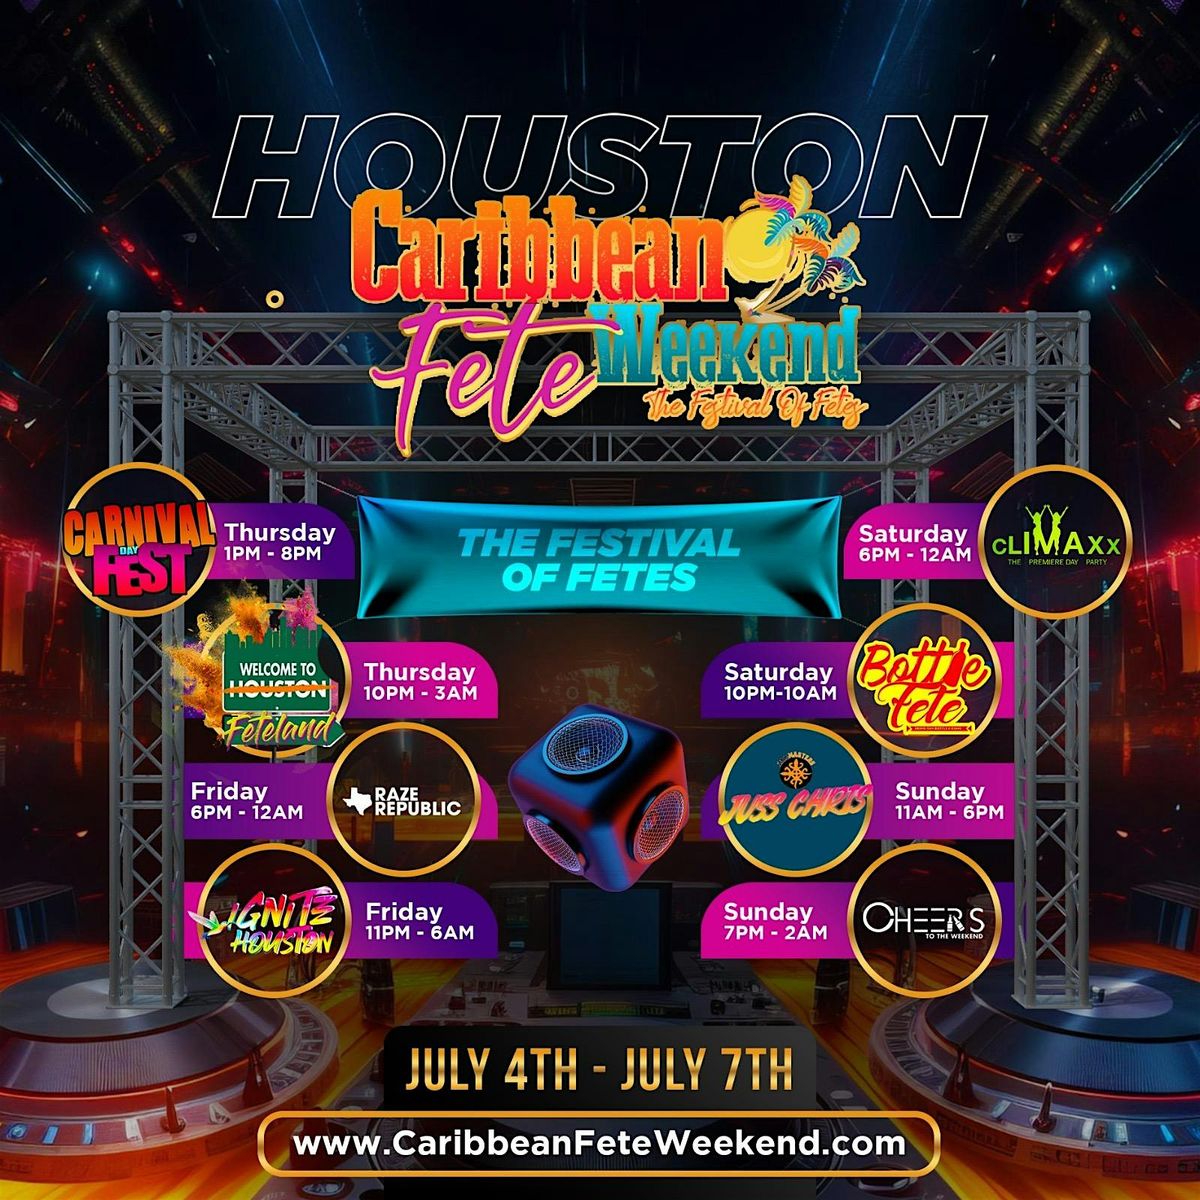 Caribbean Fete Weekend Houston July 4th to July 7th